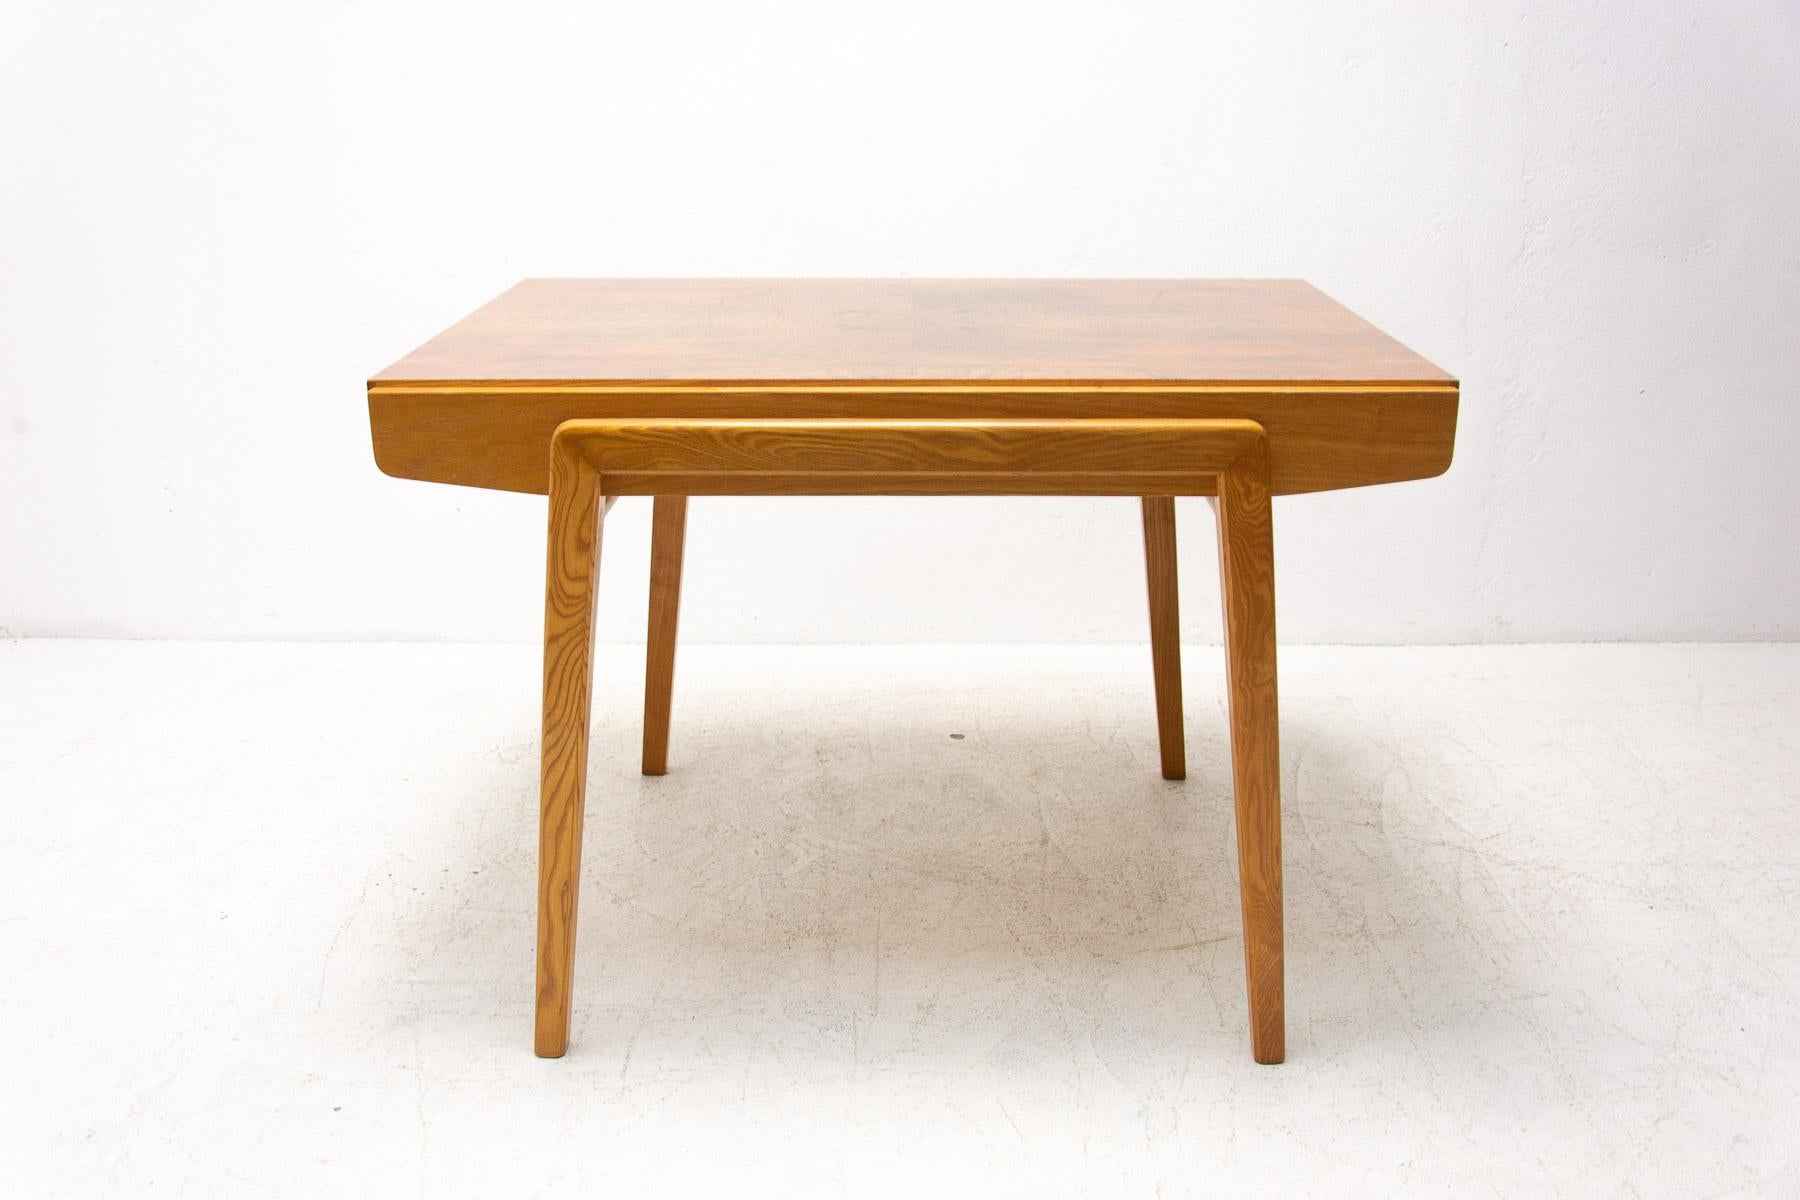 This adjustable dining table was made by Jitona Company in the former Czechoslovakia in the 1970´s. It ´s made of wood in walnut and ash wood veneer. The lenght is adjustable from 108 cm to 140 cm. The table is in good Vintage condition, the surface